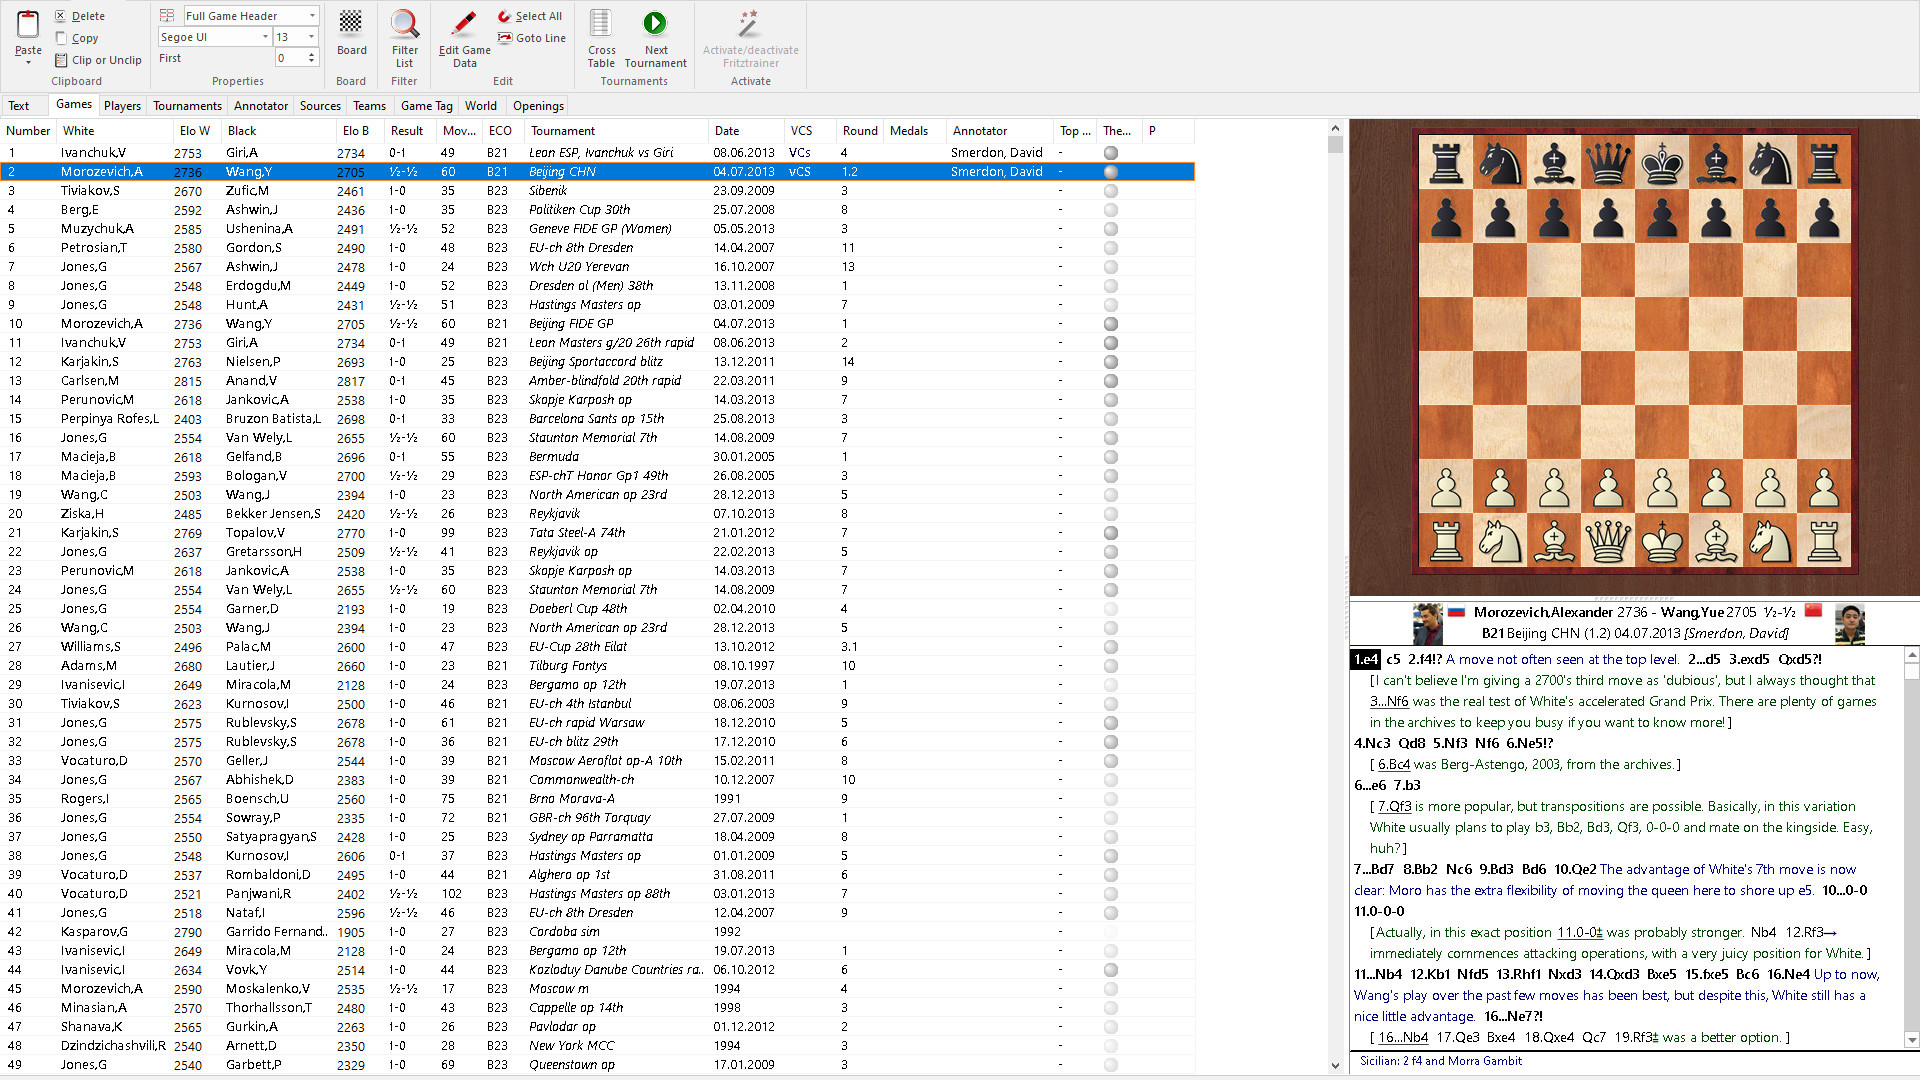 Is ChessBase 17 Worth the Price? A Complete Review